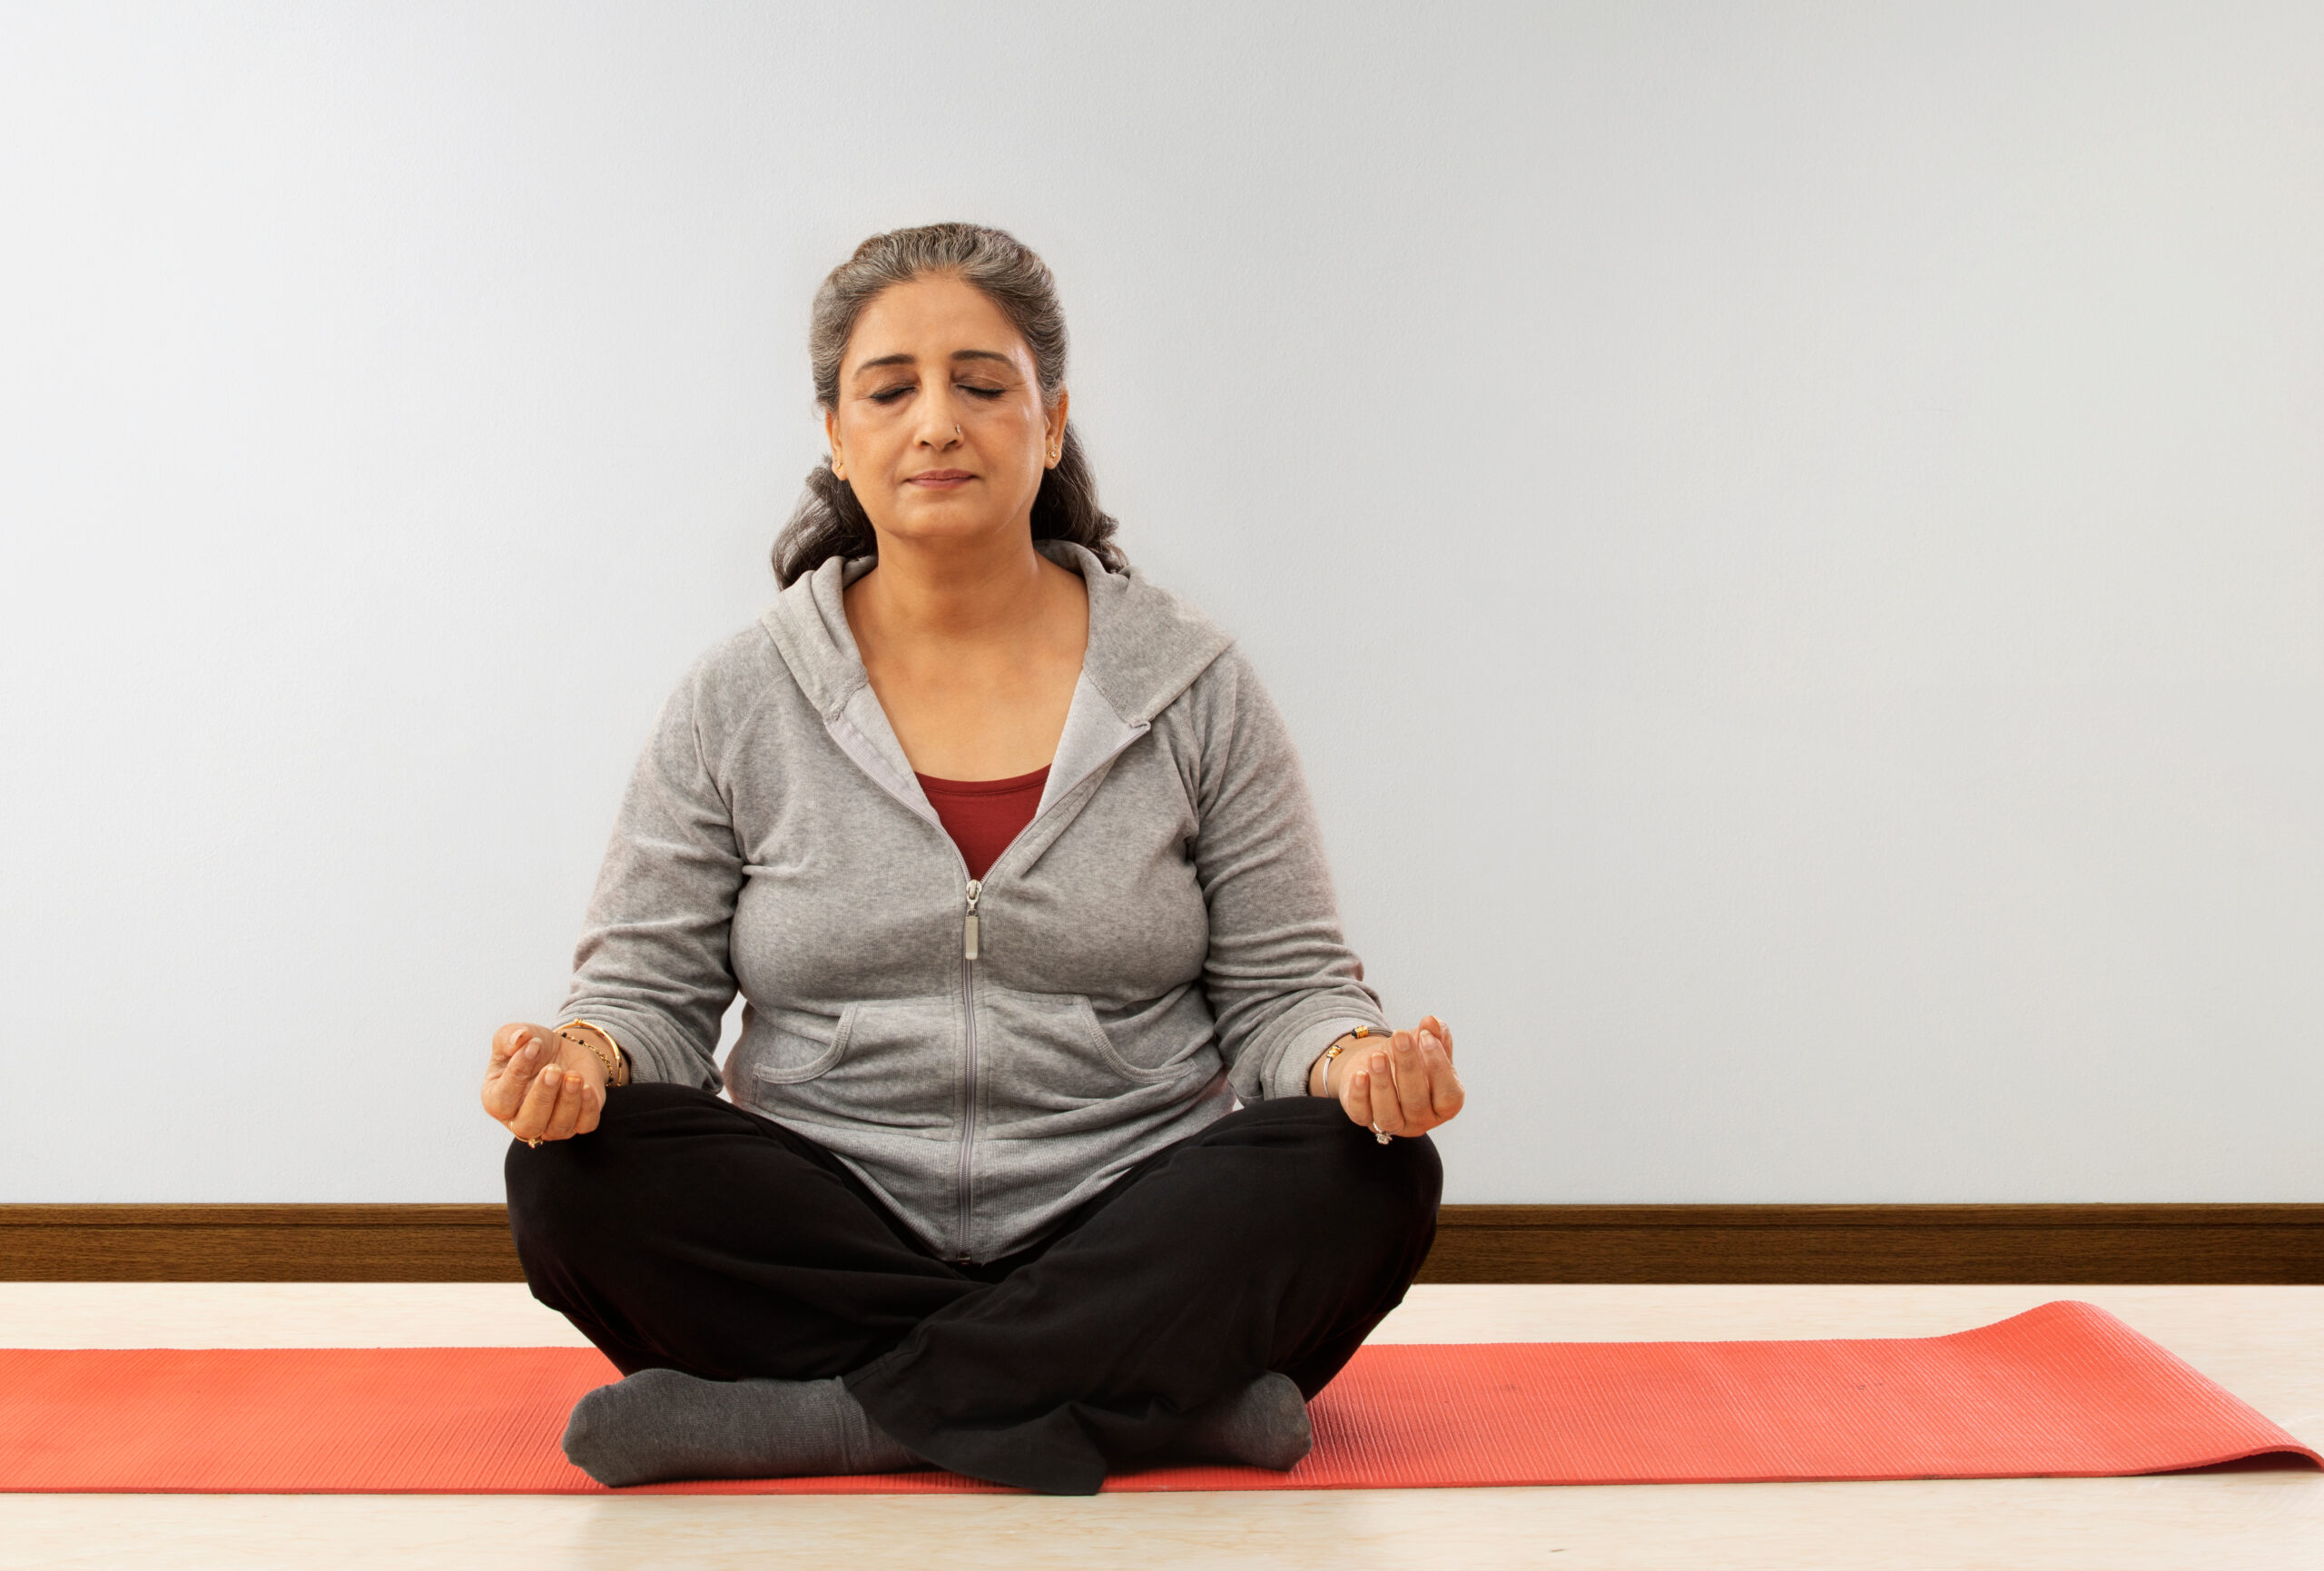 Yoga Poses that help during Periods | LAIQA